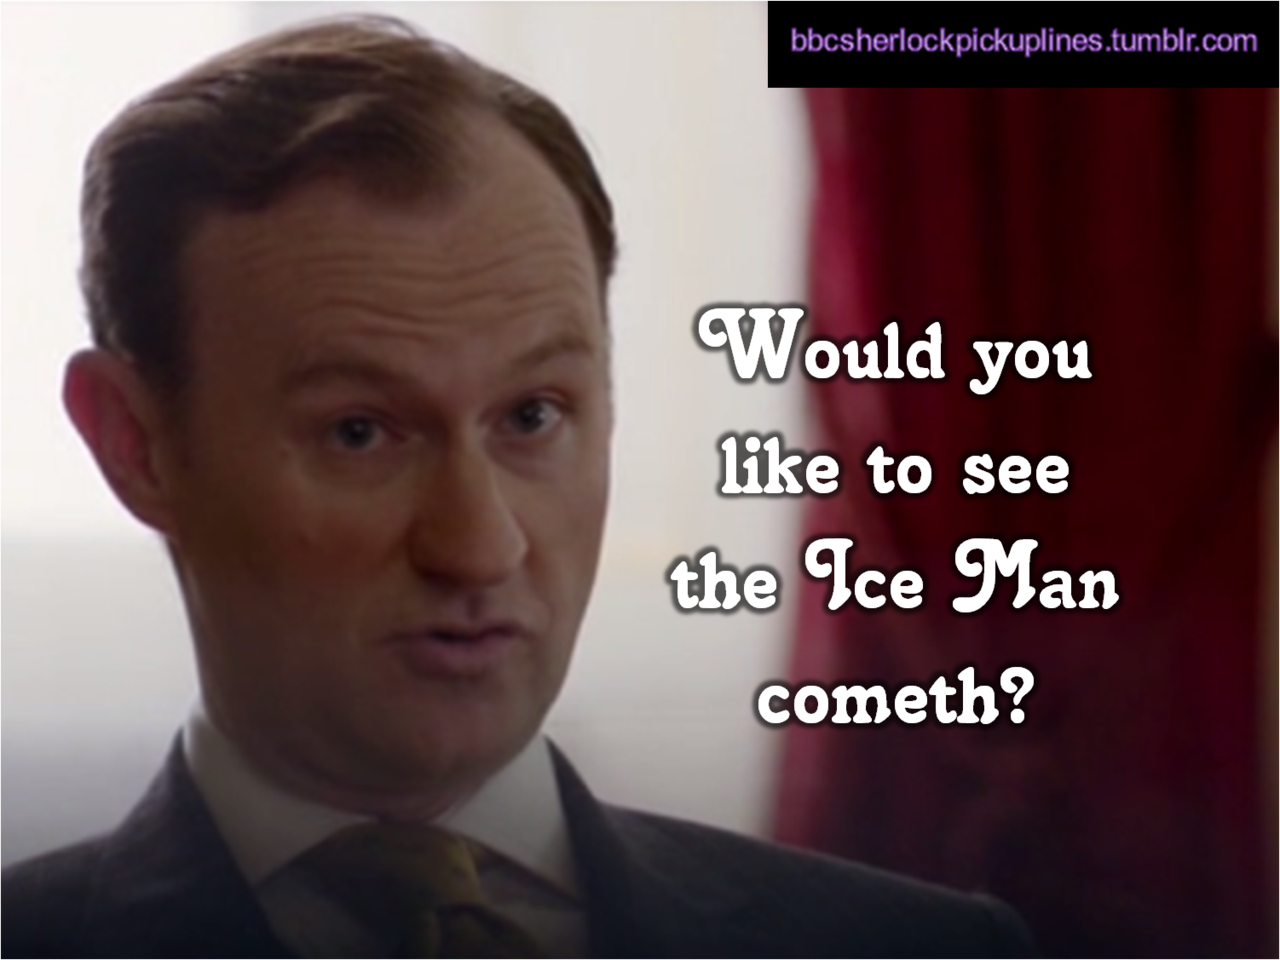 The best of A Scandal in Belgravia references, from BBC Sherlock pick-up lines.